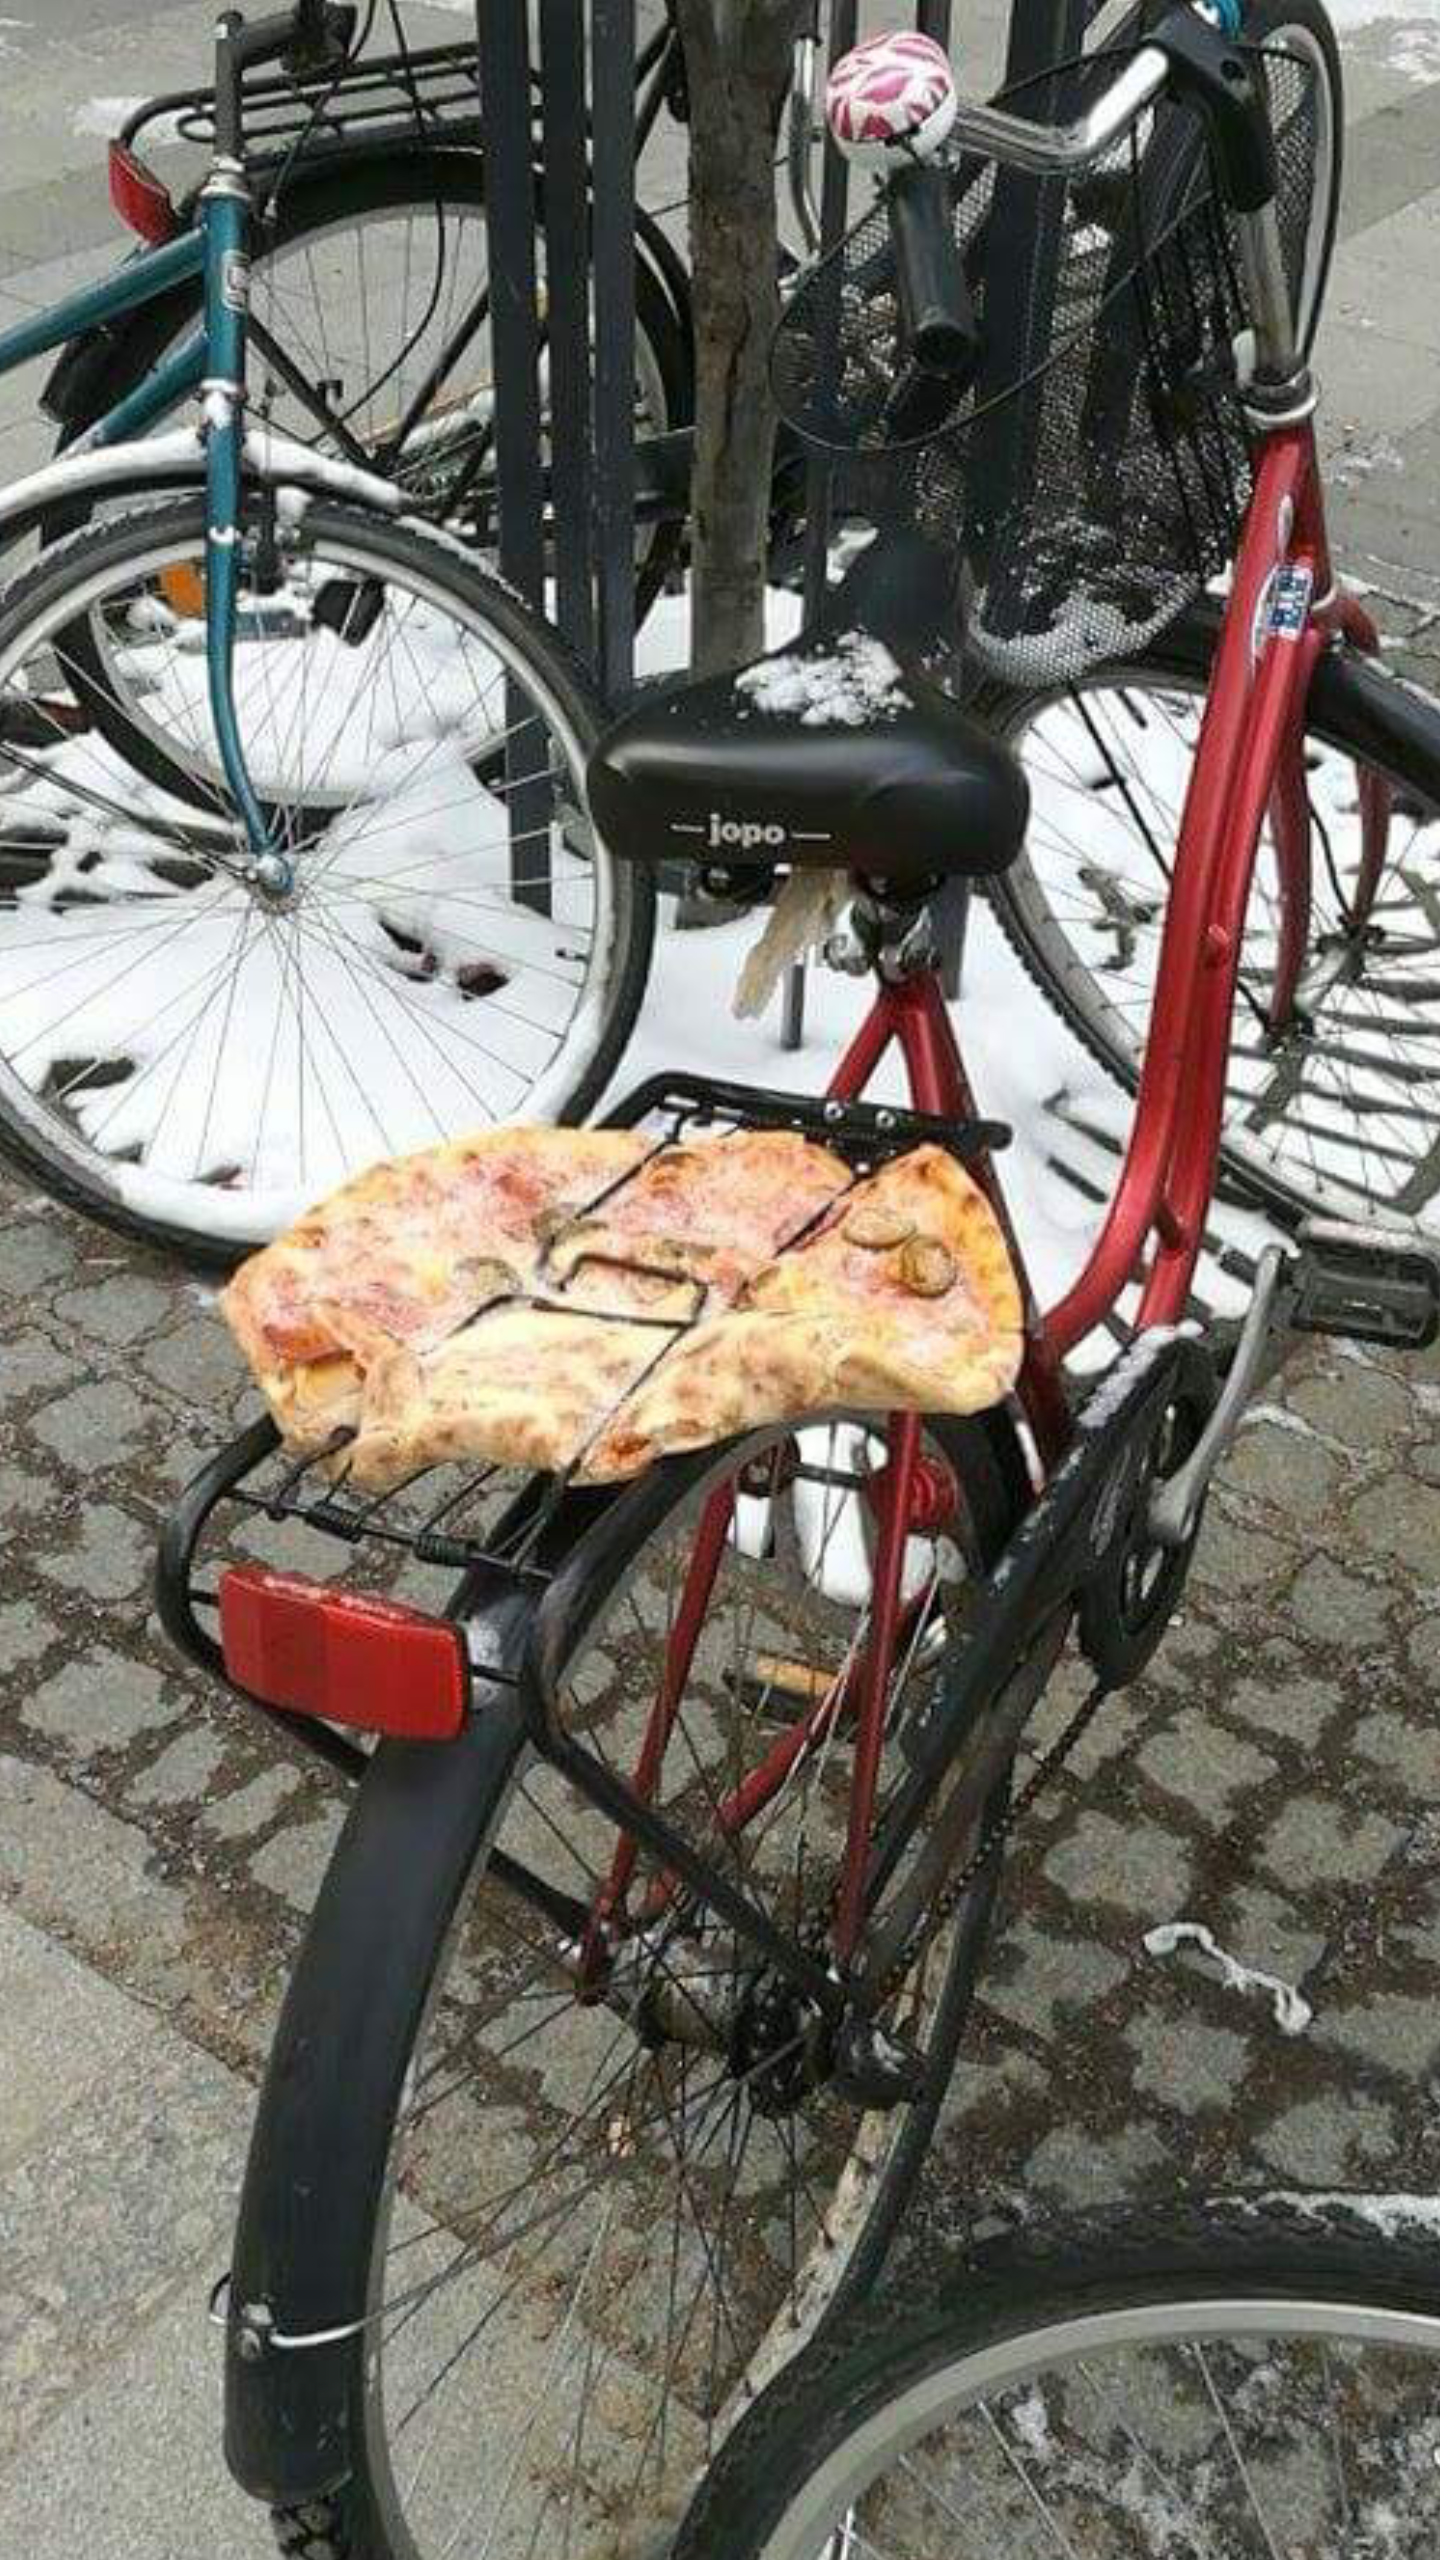 funny pics and memes - Pizza stuck on back of bicycle